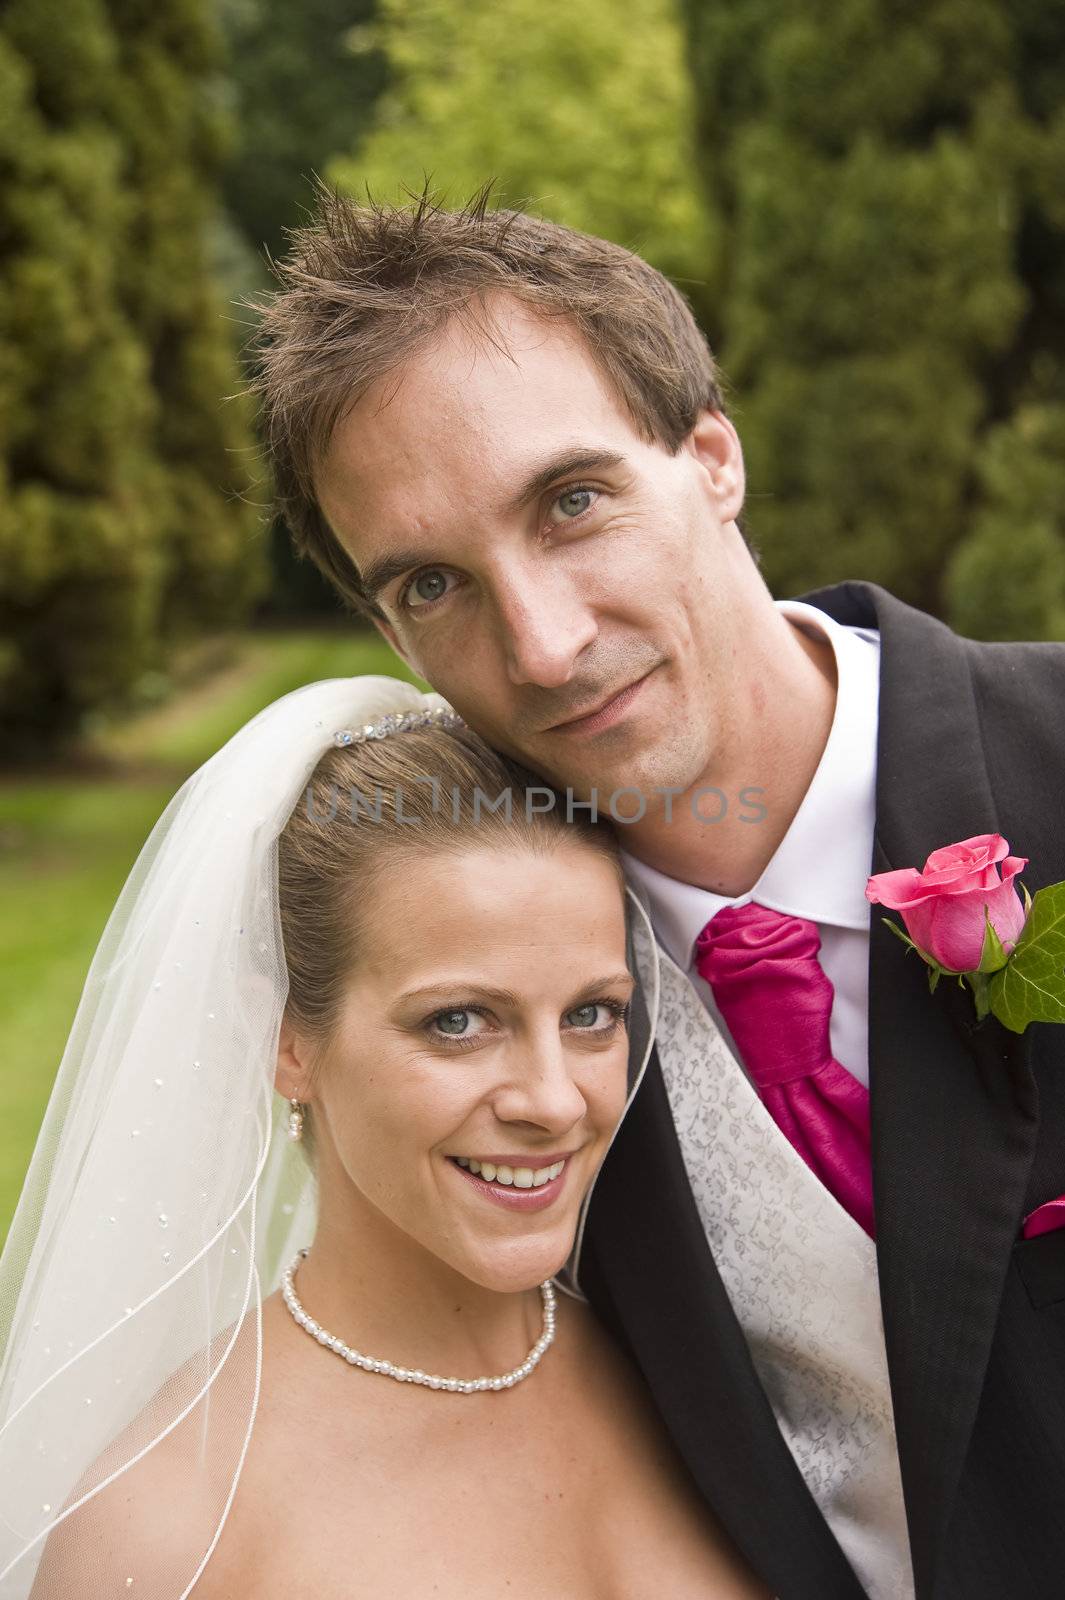 Attractive young bride and groom portrait outdoors